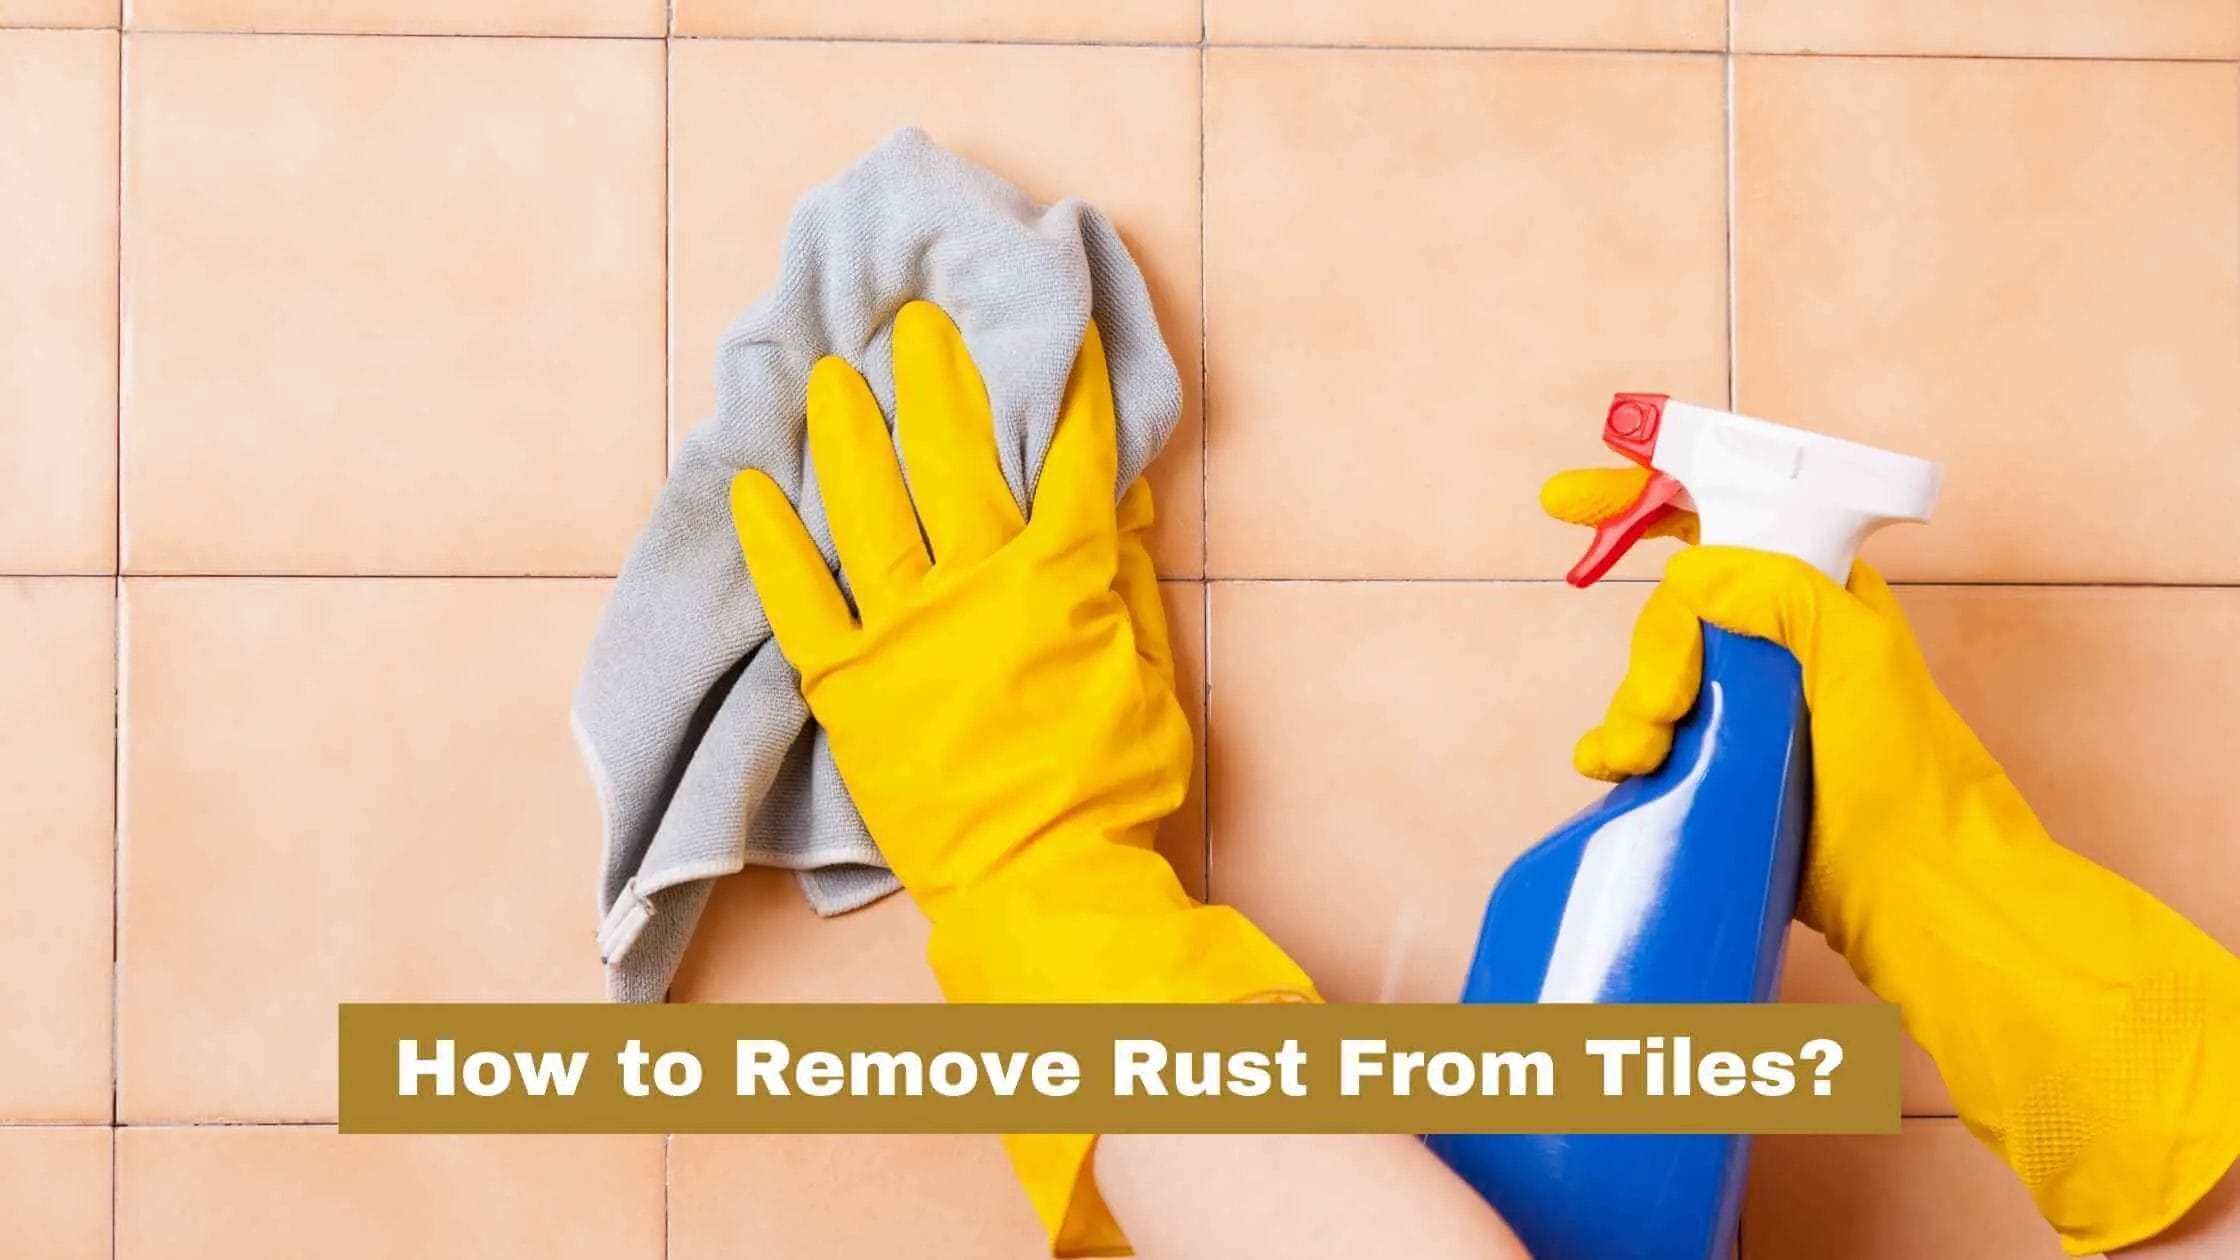 How to Remove Rust From Tiles